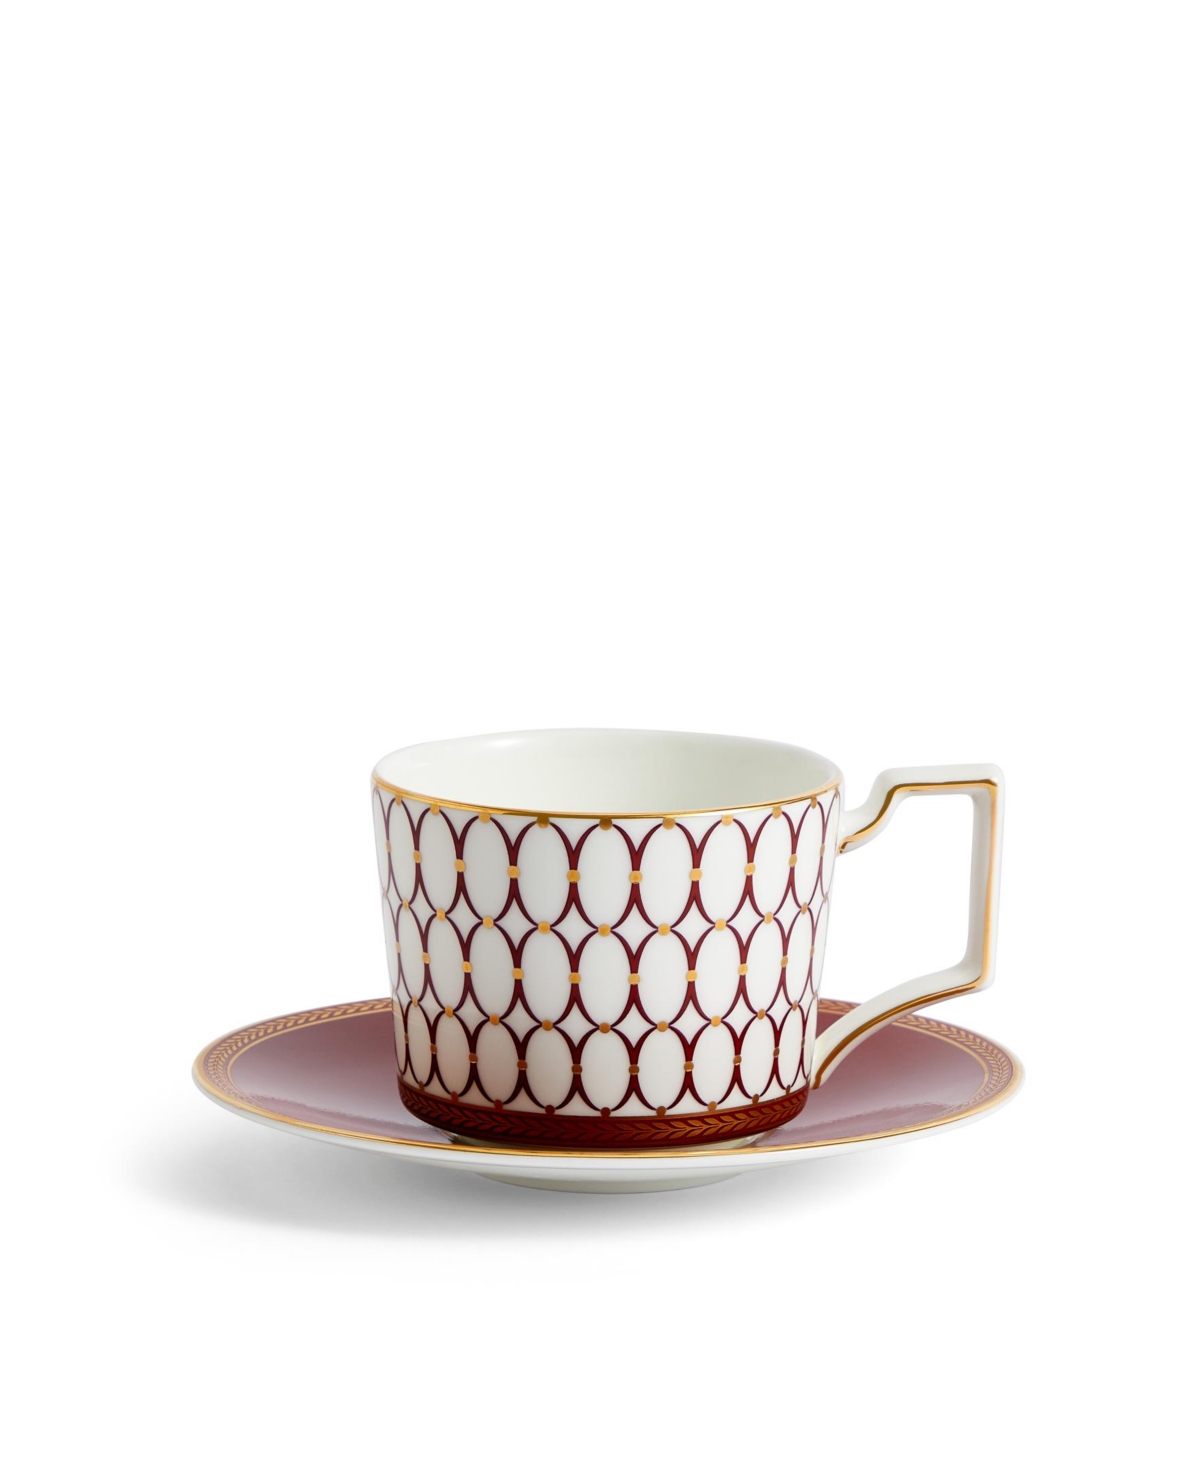 Wedgwood Renaissance Red China Teacup And Saucer